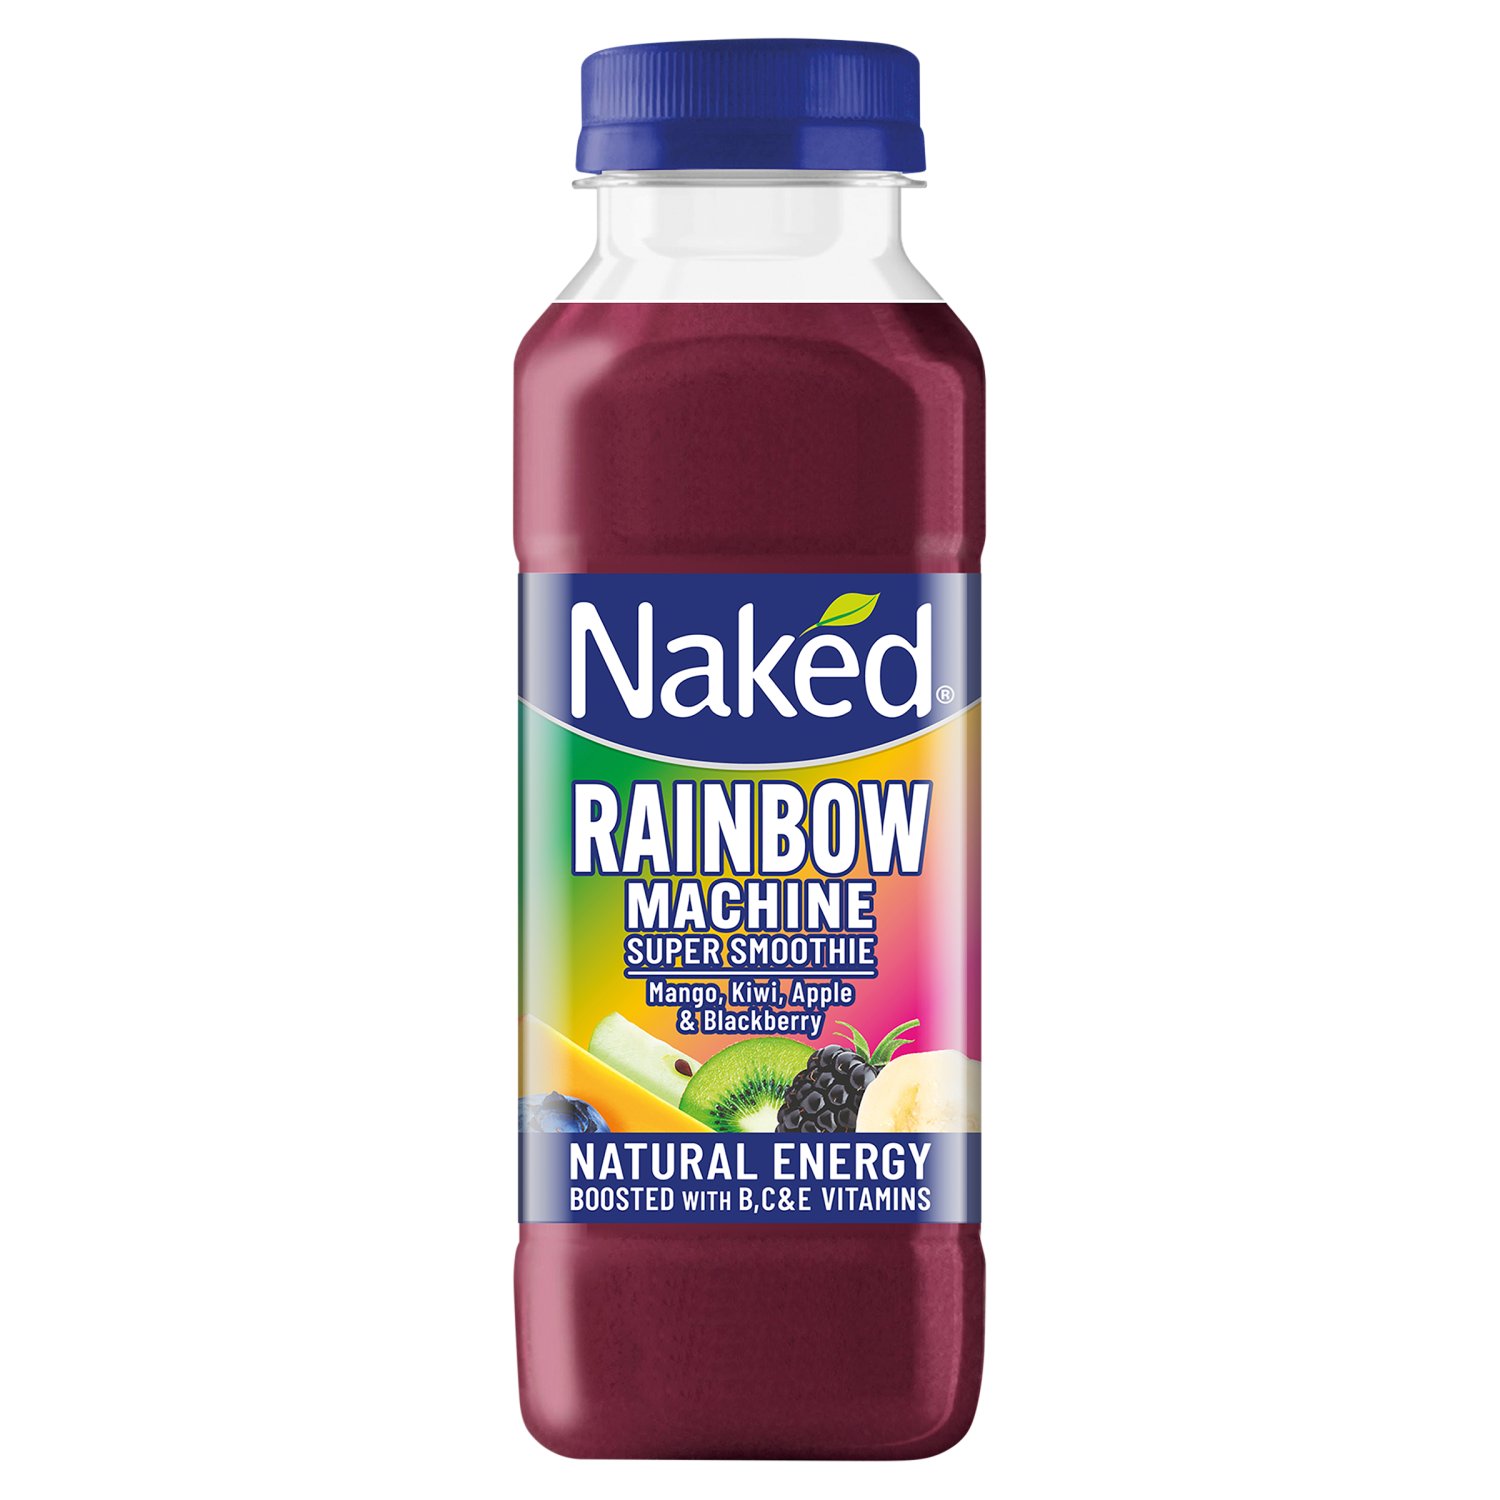 A Rainbow of Fruit to boost your day with the Rainbow Machine Super Smoothie. 

This super smoothie is packed with an explosion of flavour from  1 3/4 apples, 1 banana, 1/5 kiwi, 29 blueberries, 3 1/2 blackberries, 1/3 beetroot, a slice of mango, a hint of elderberry per bottle.

Boosted with vitamins. Contains Vitamins C, B1, B2, B6, & E.
Vitamin B2 (riboflavin) contributes to the reduction of tiredness and fatigue. Vitamin B6 contributes to the normal function of the immune system.